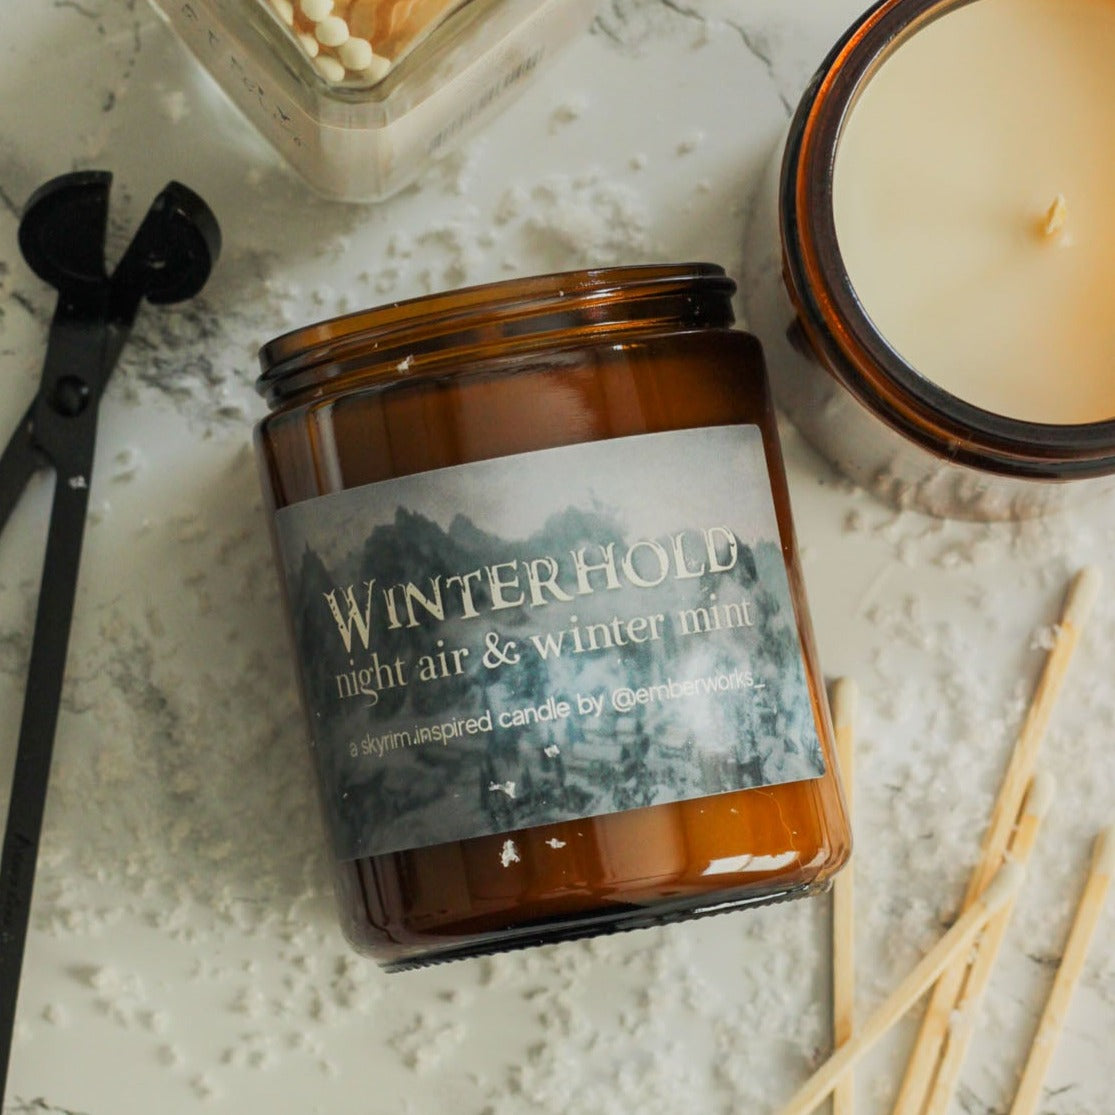 Winterhold - A Skyrim Inspired Candle